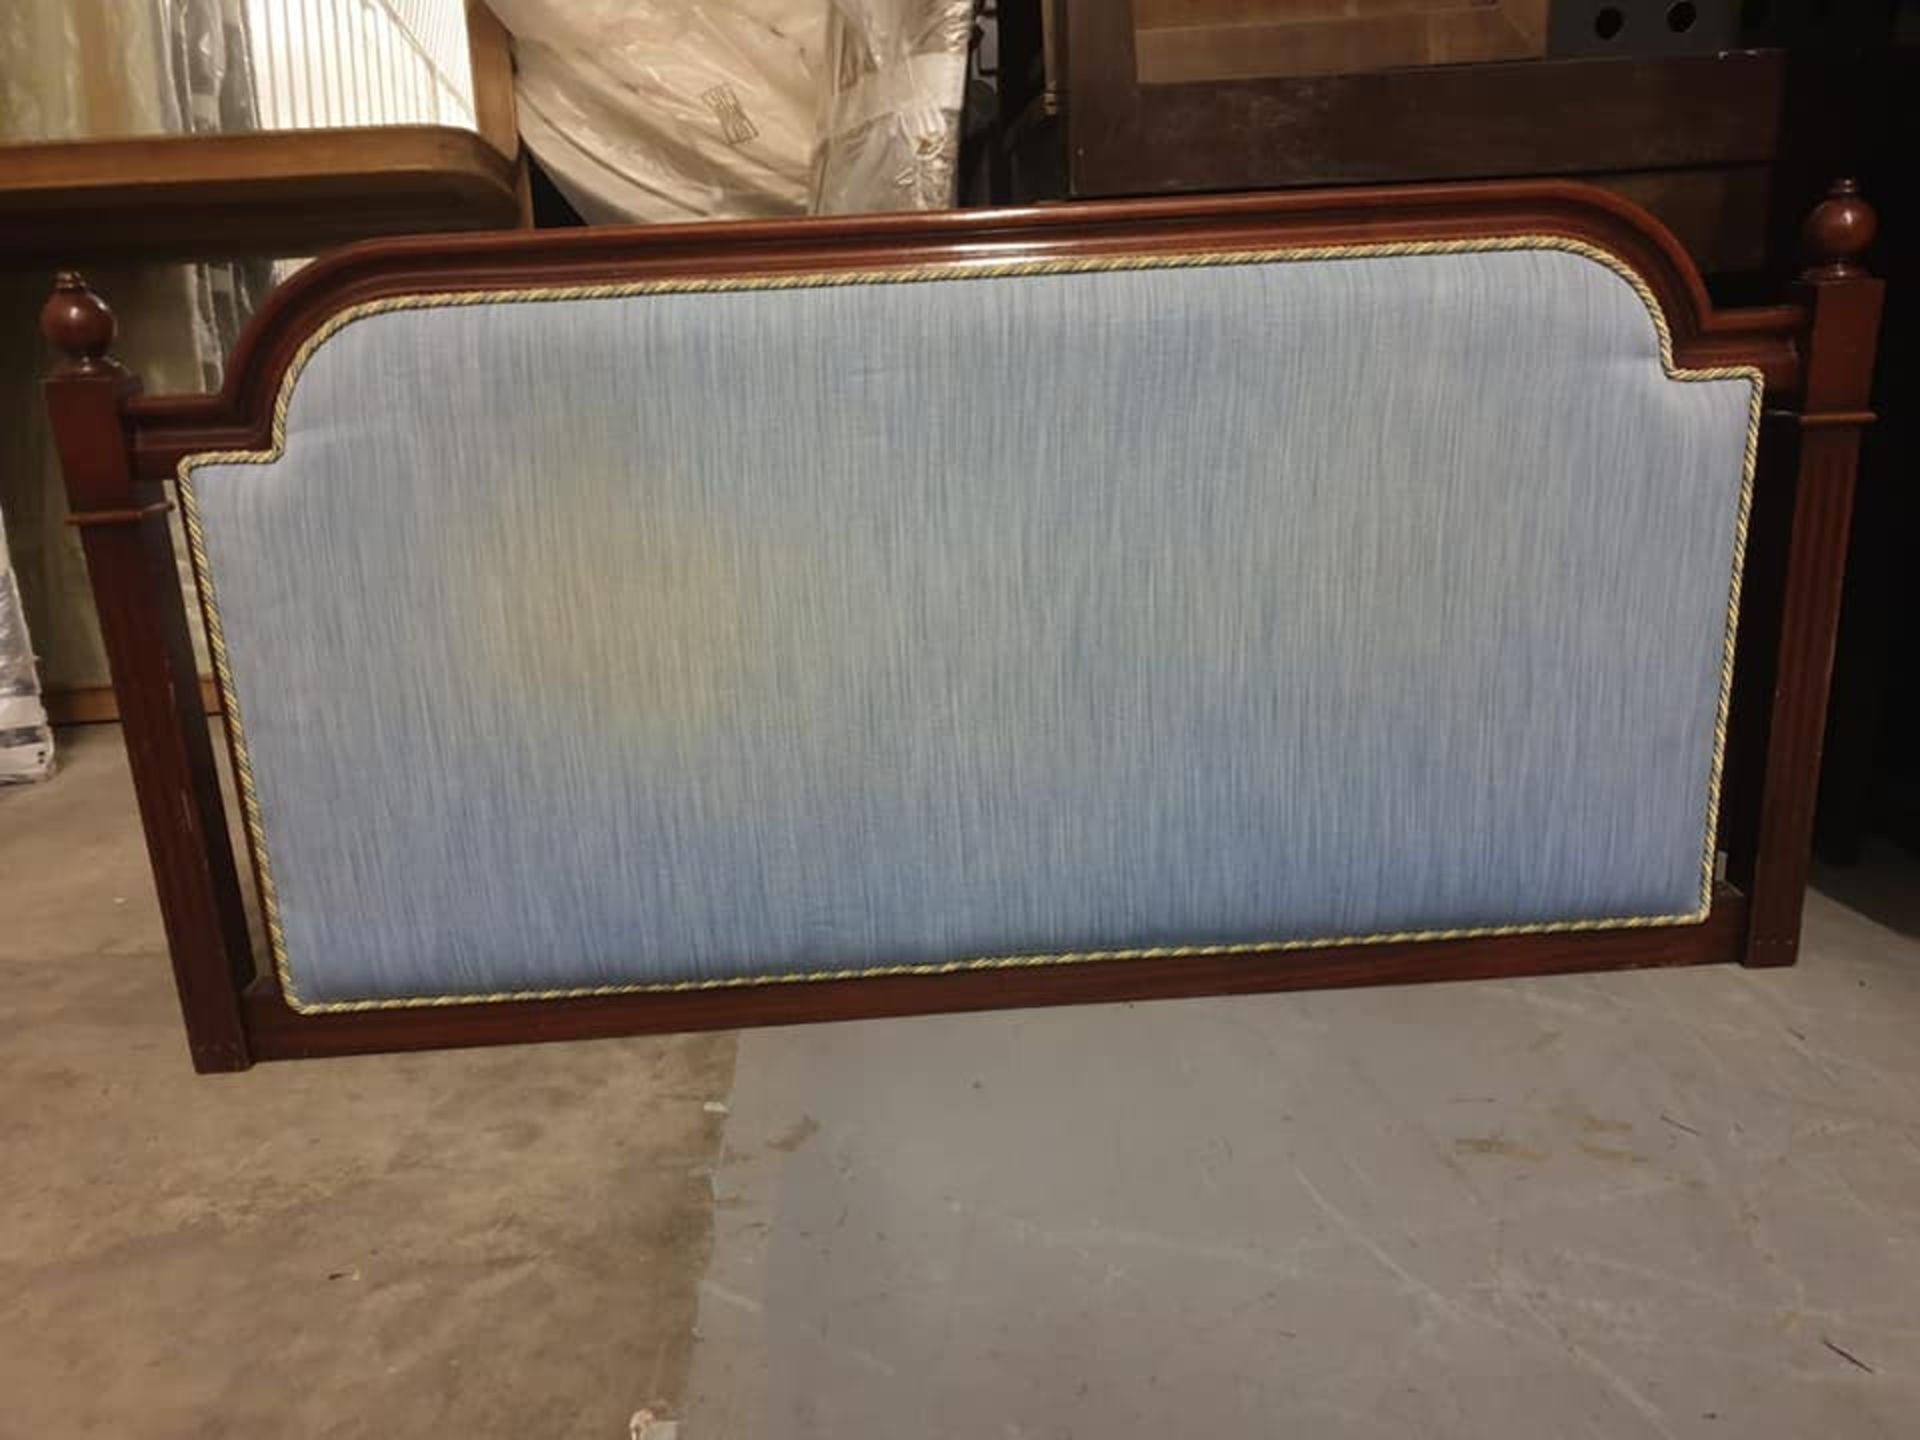 Dundee Luxury headboard mahogany framed light blue padded with rope piping 156 x 76cm